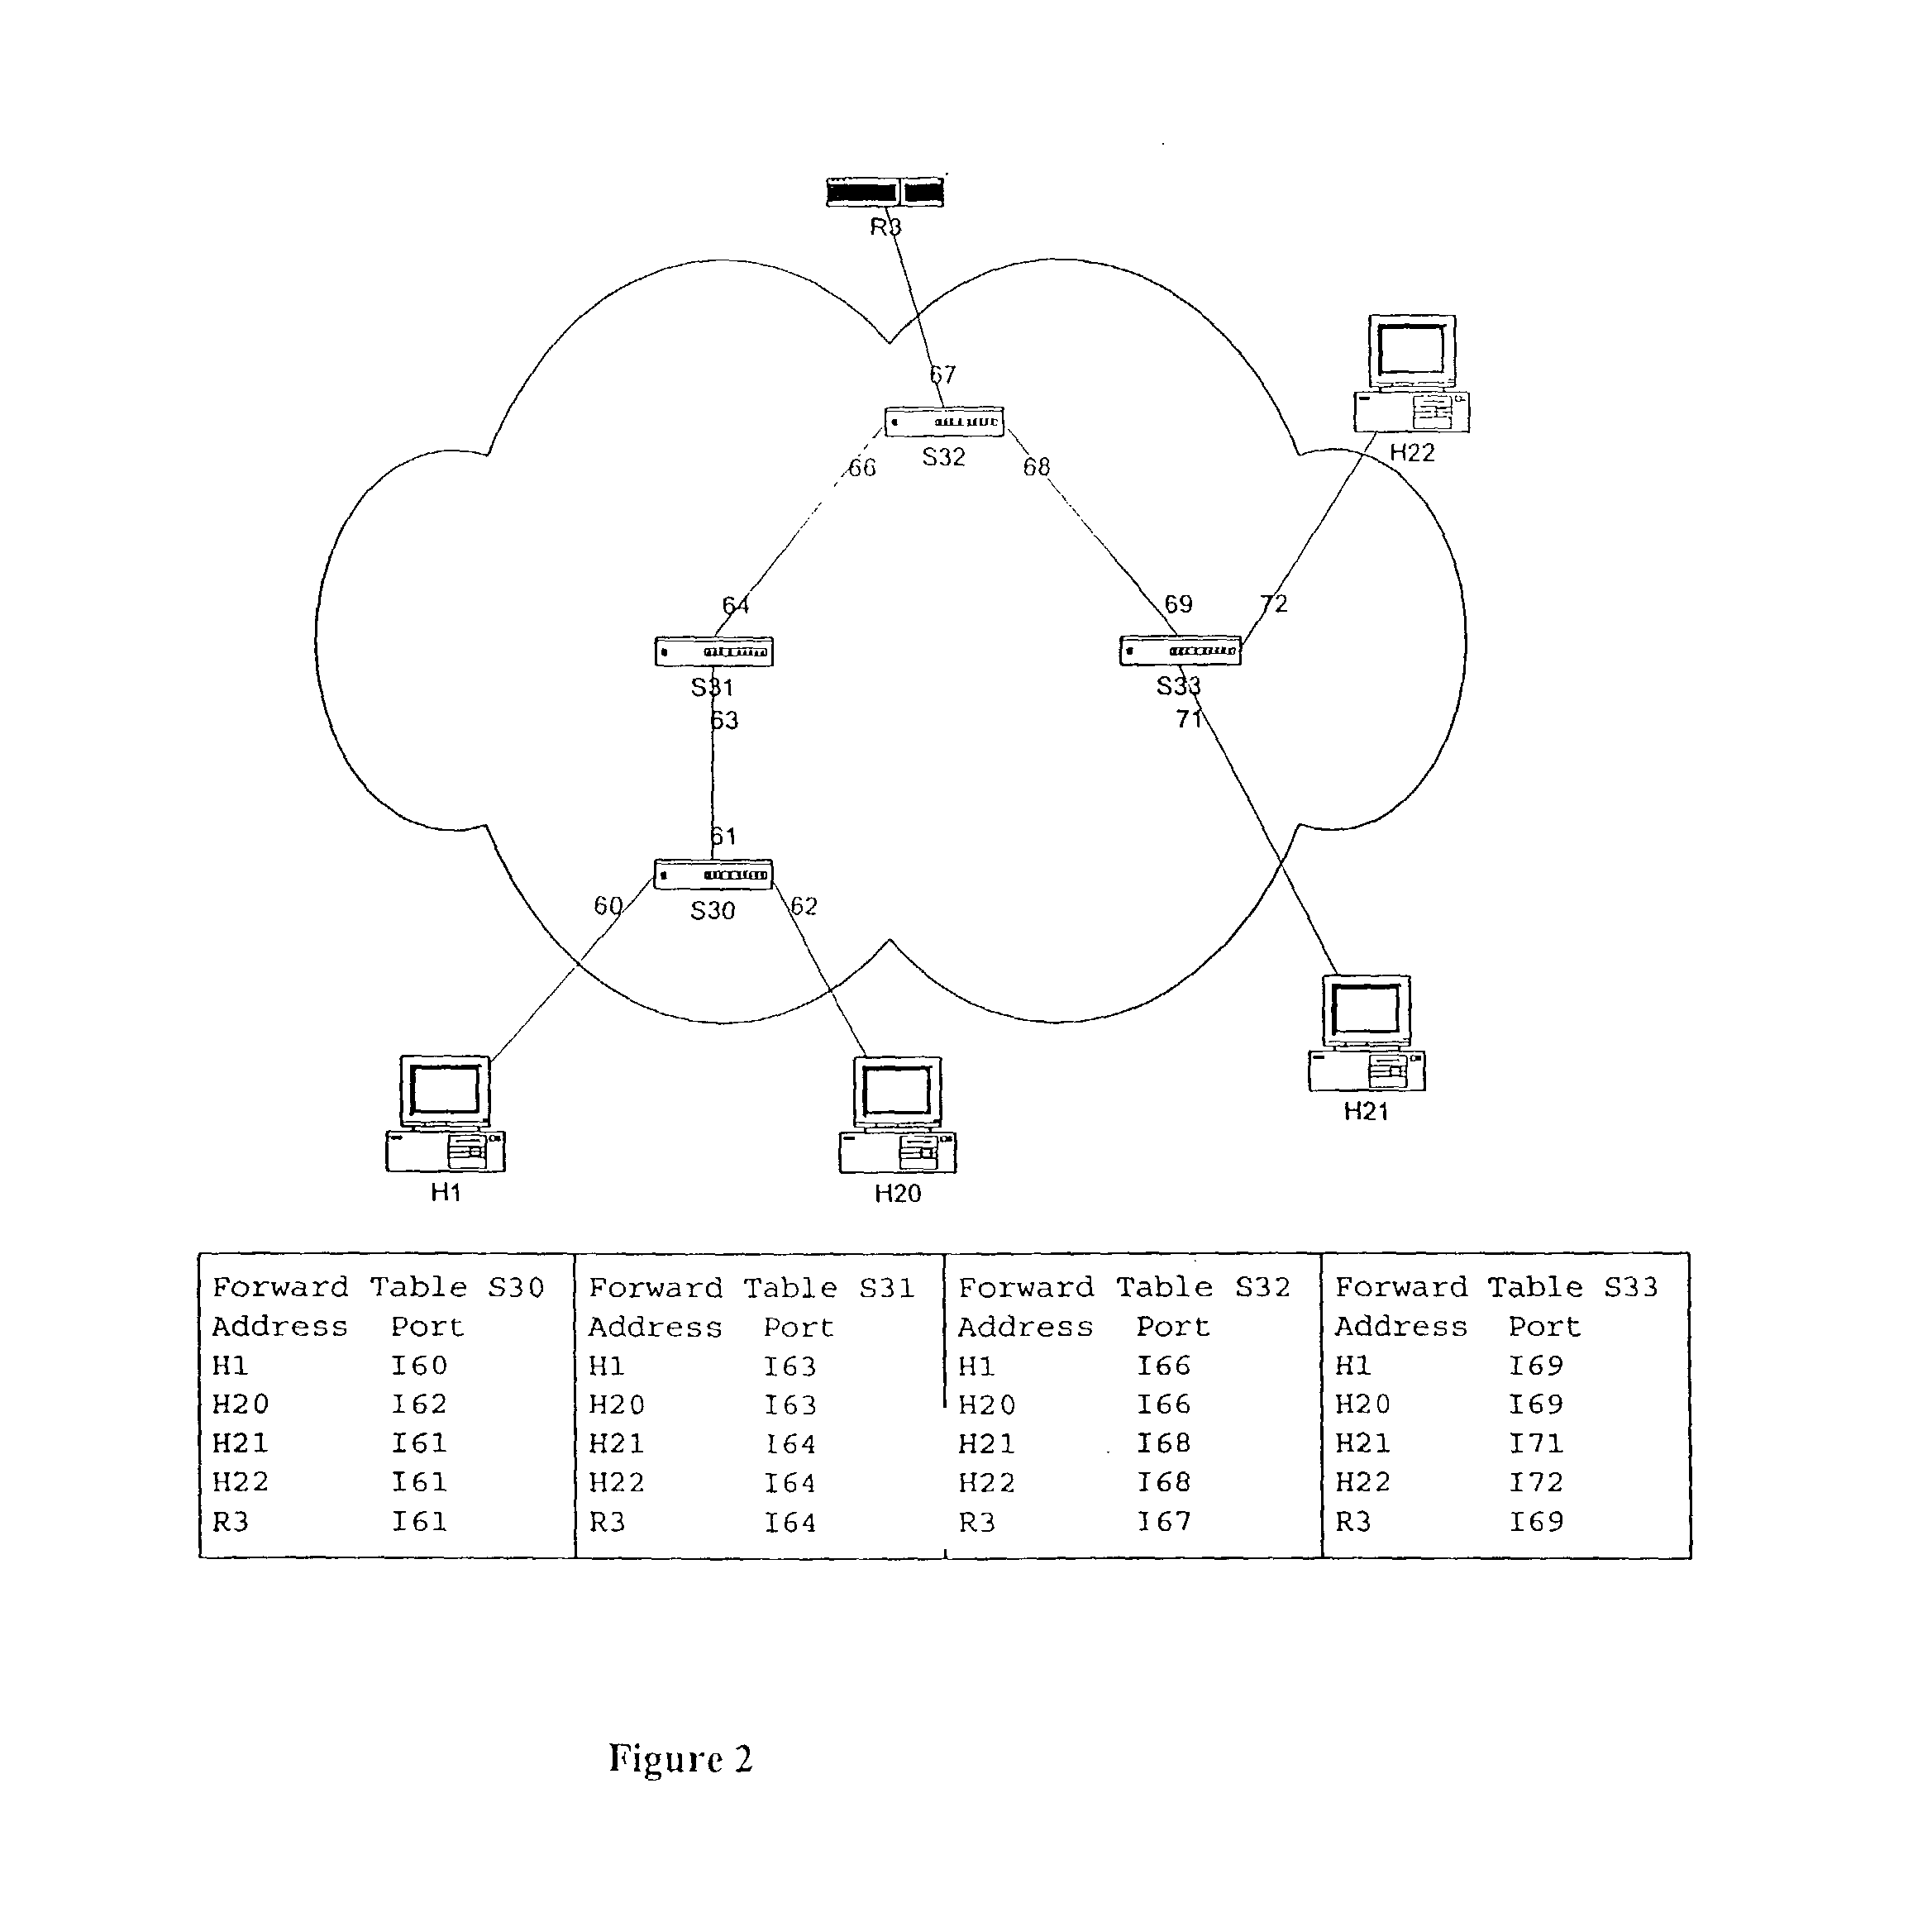 Network topology discovery systems and methods